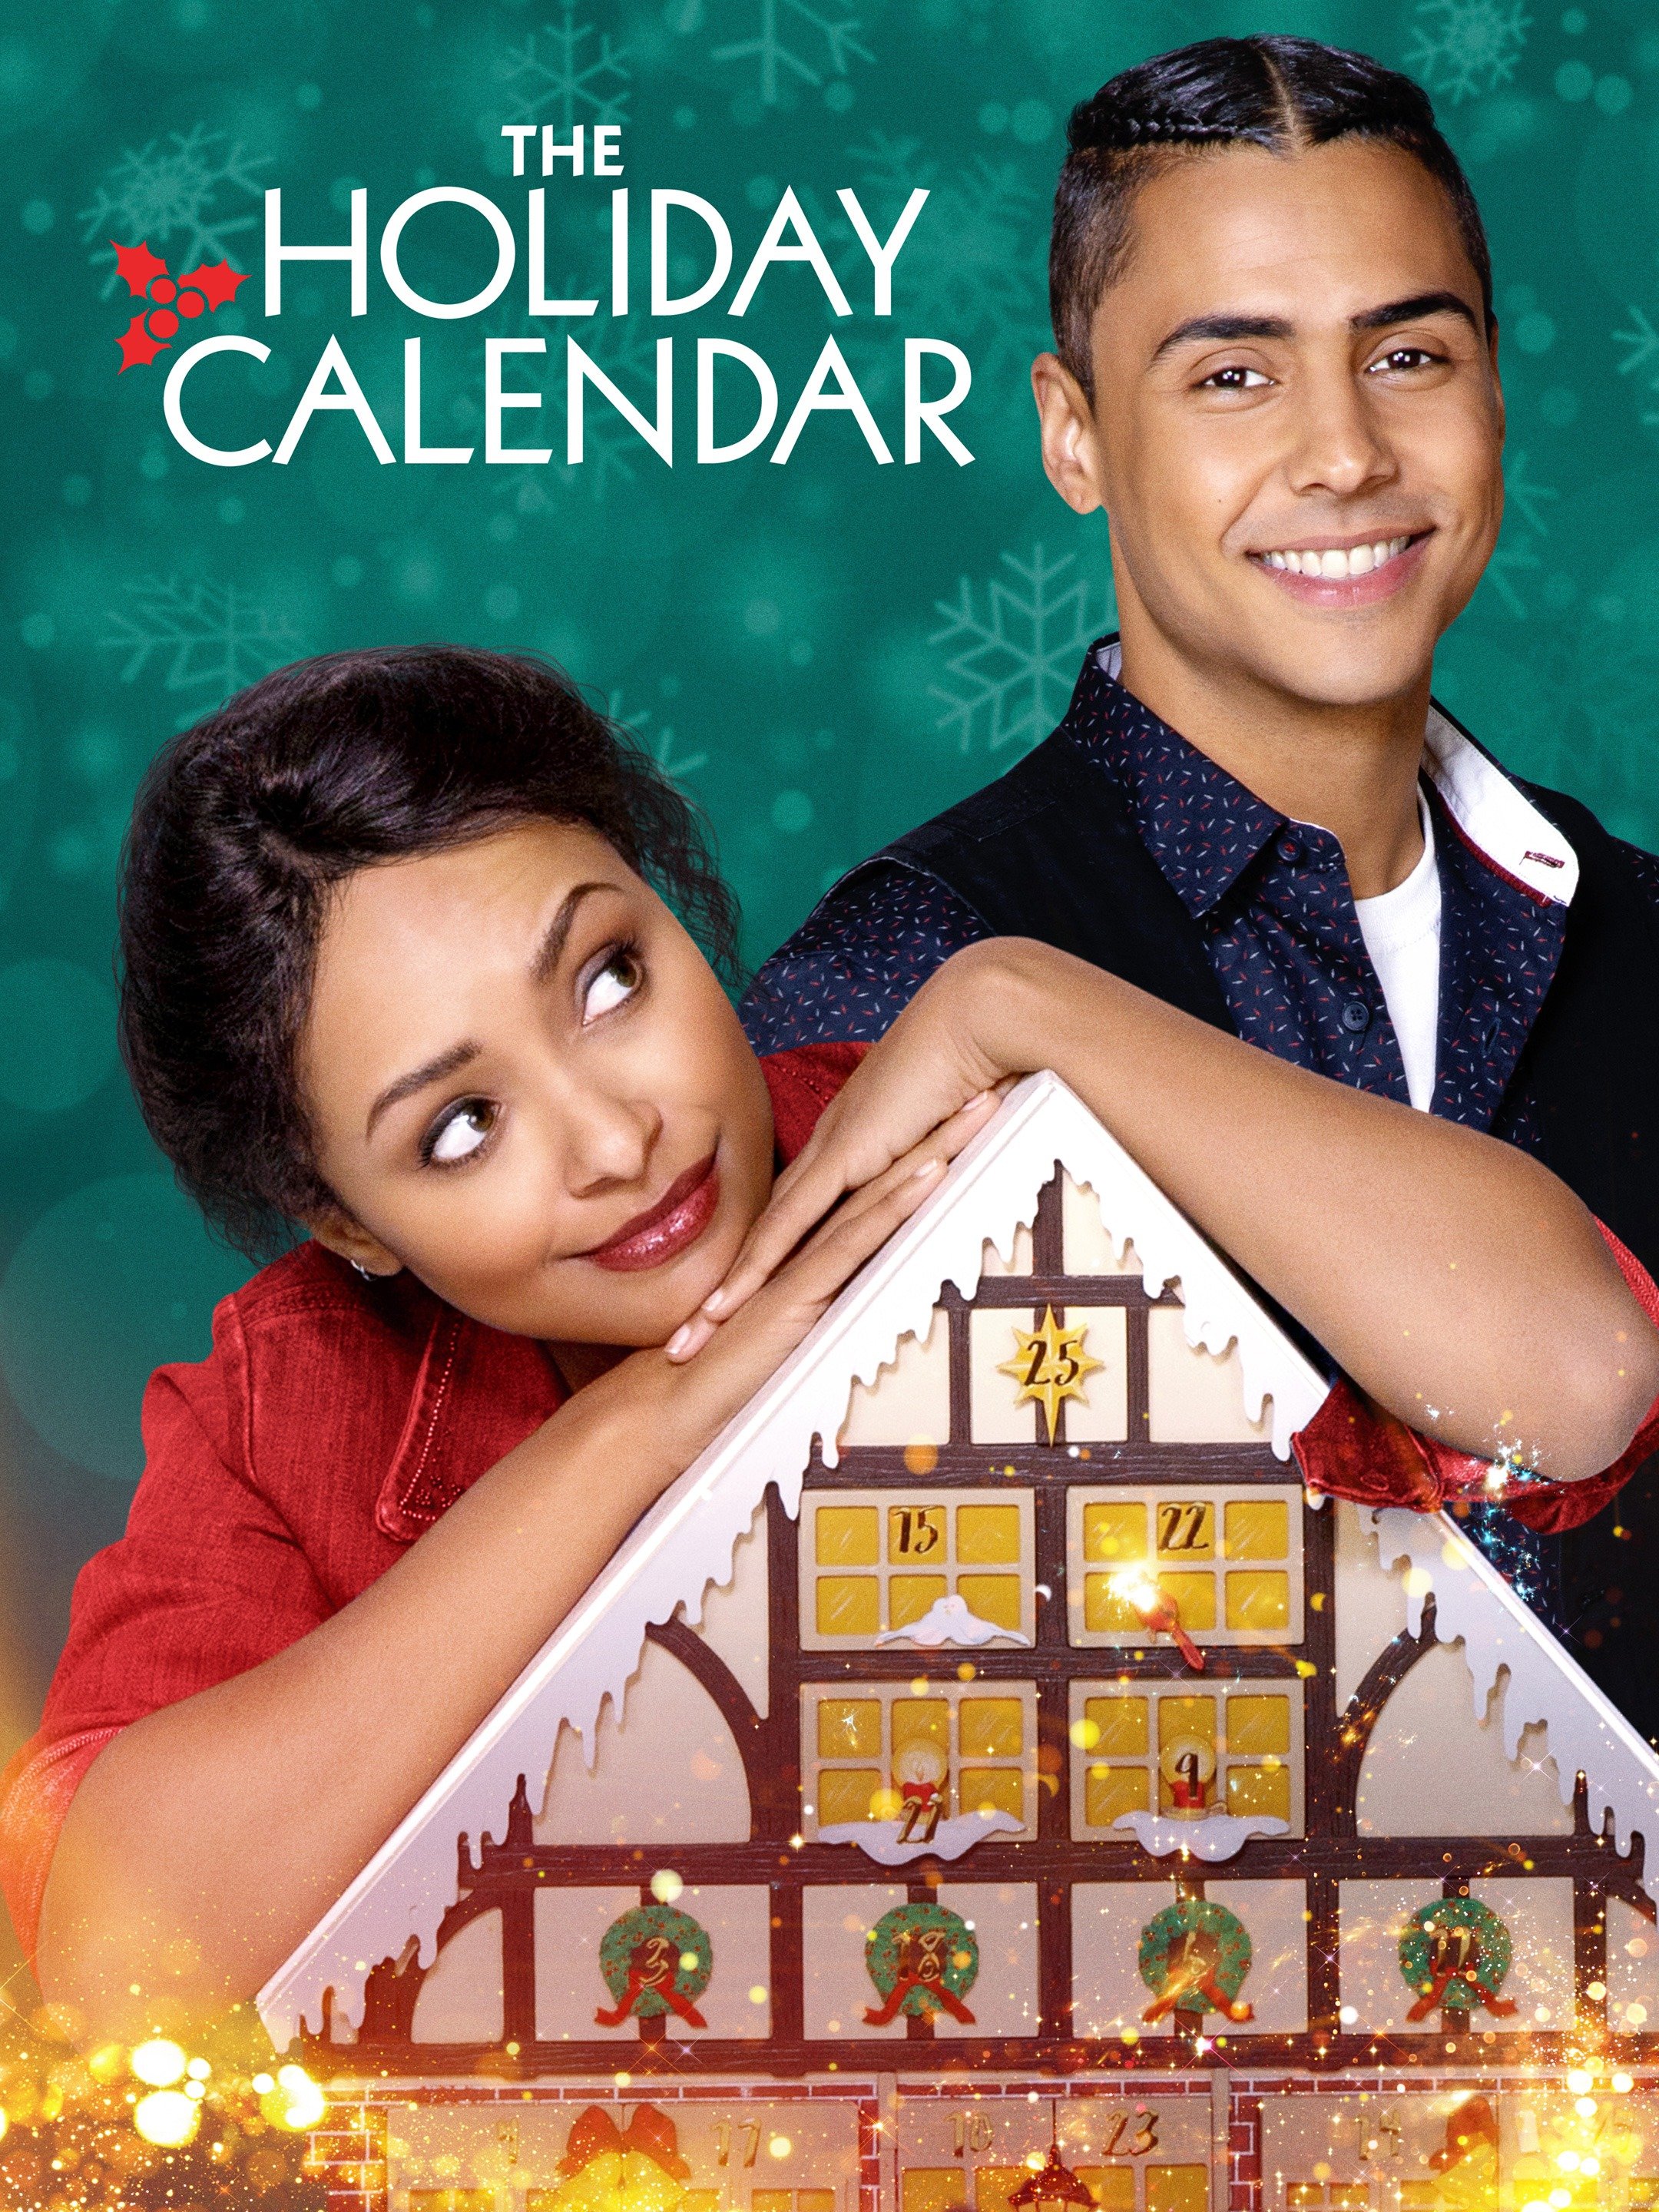 The Holiday Calendar Trailer 1 Trailers & Videos Rotten Tomatoes